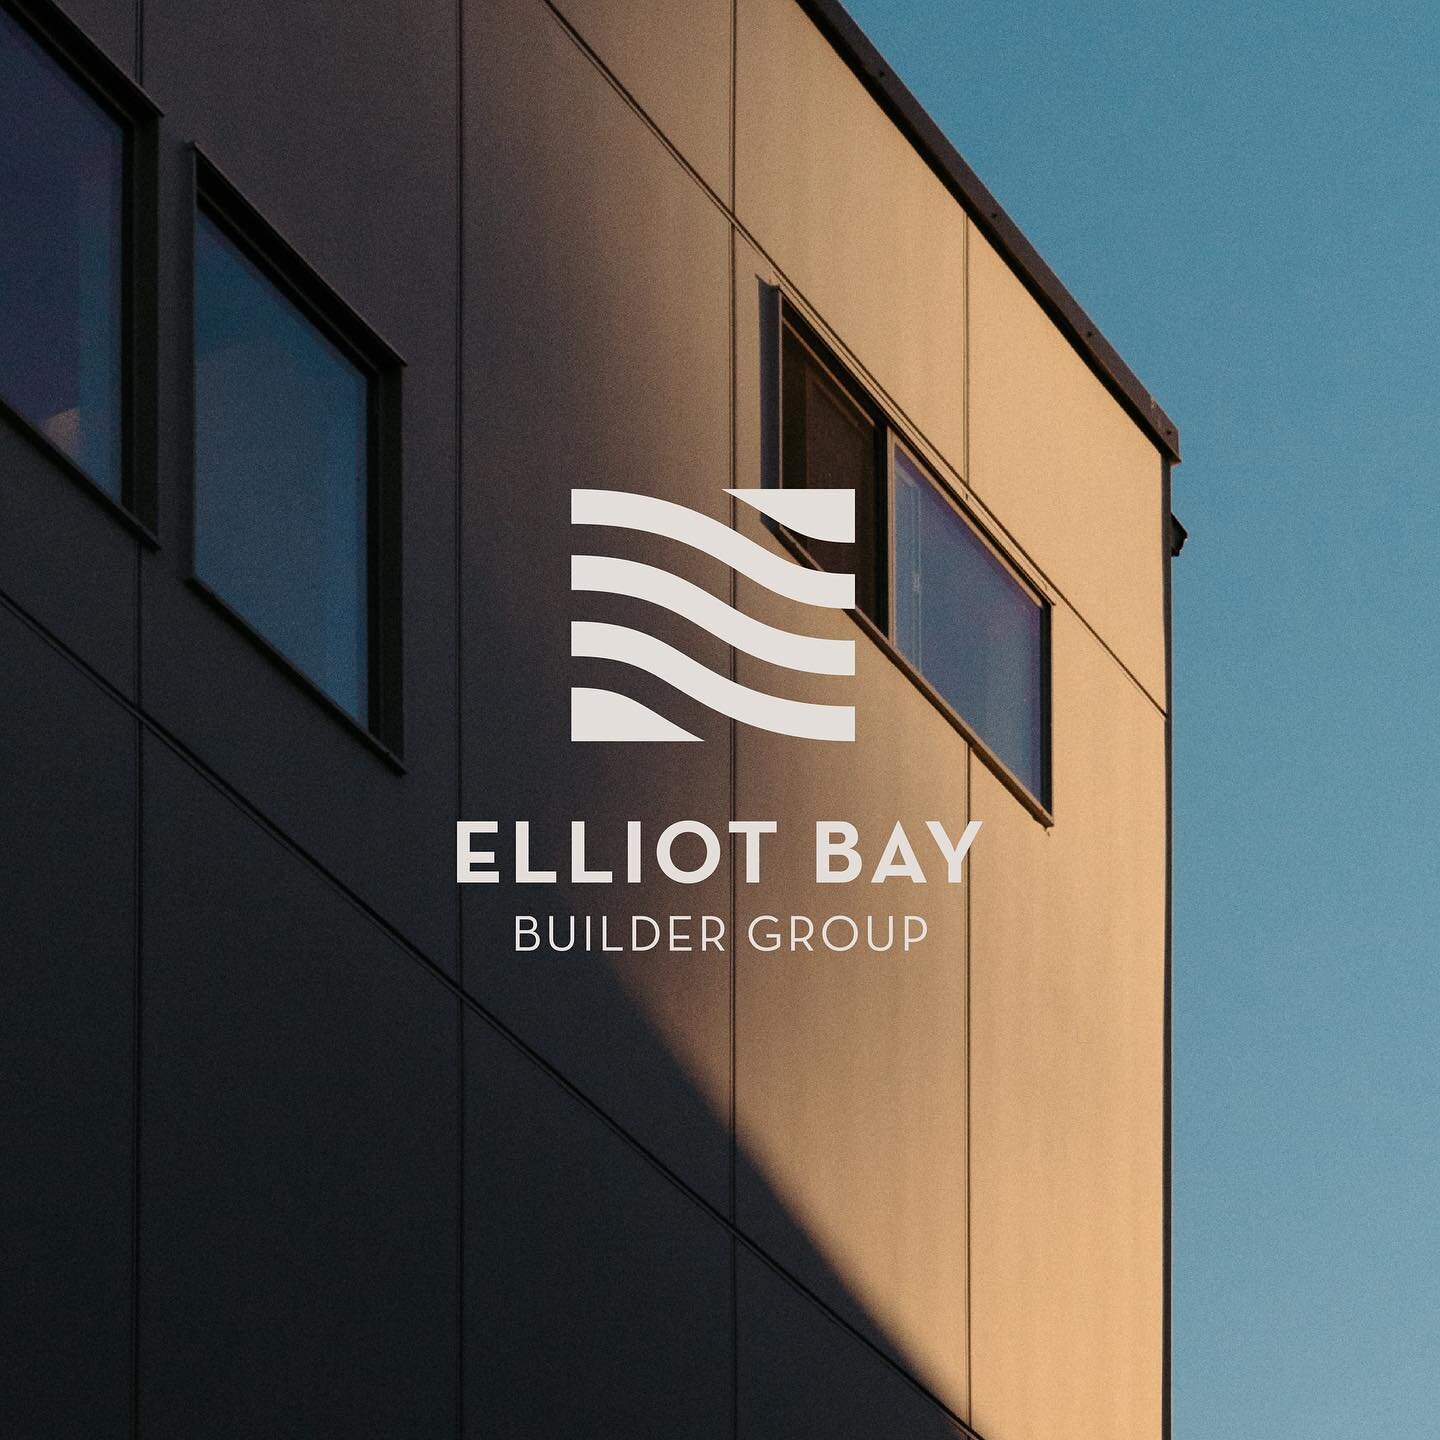 Logos tell a story at first glance. This logo tells a story of the balance between structure and movement,  like a perfect wave or body of water. Perfect for an approachable builder from the Puget Sound on a mission to create quality structures with 